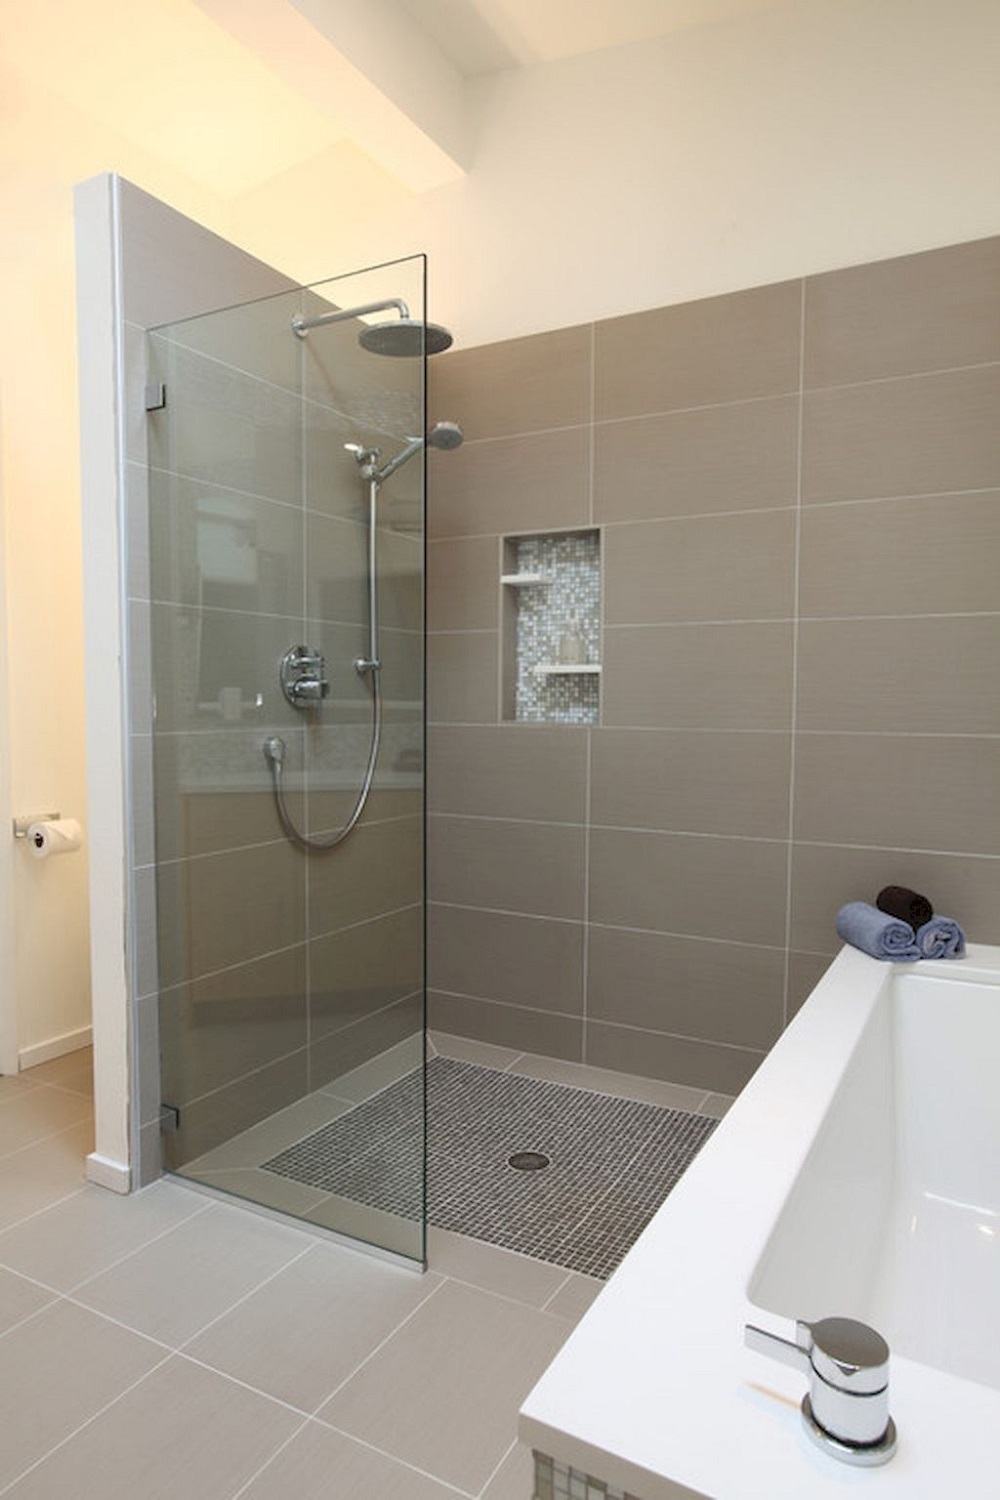 wb17 Walk-in shower ideas and tips for having one (cost, size, and more)